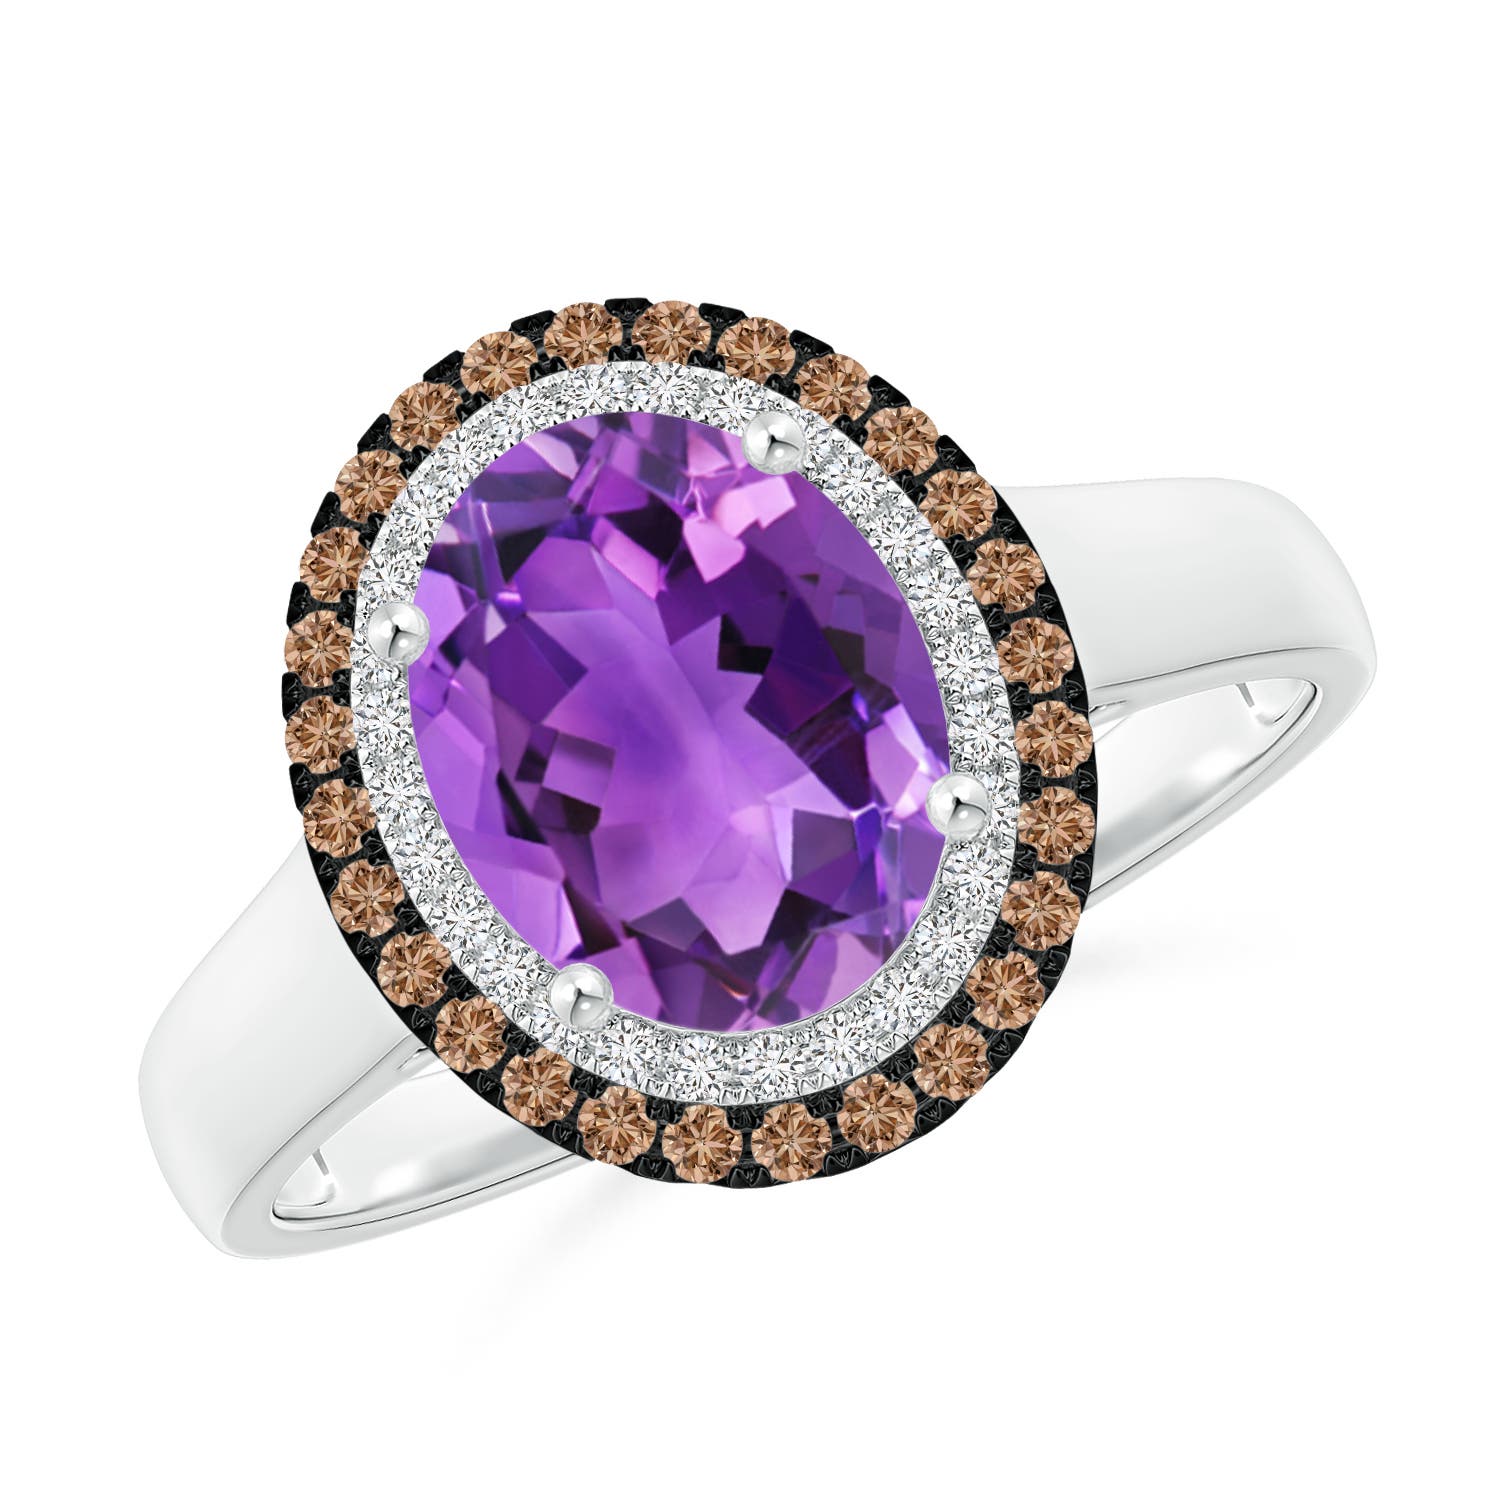 AAA - Amethyst / 1.87 CT / 14 KT White Gold